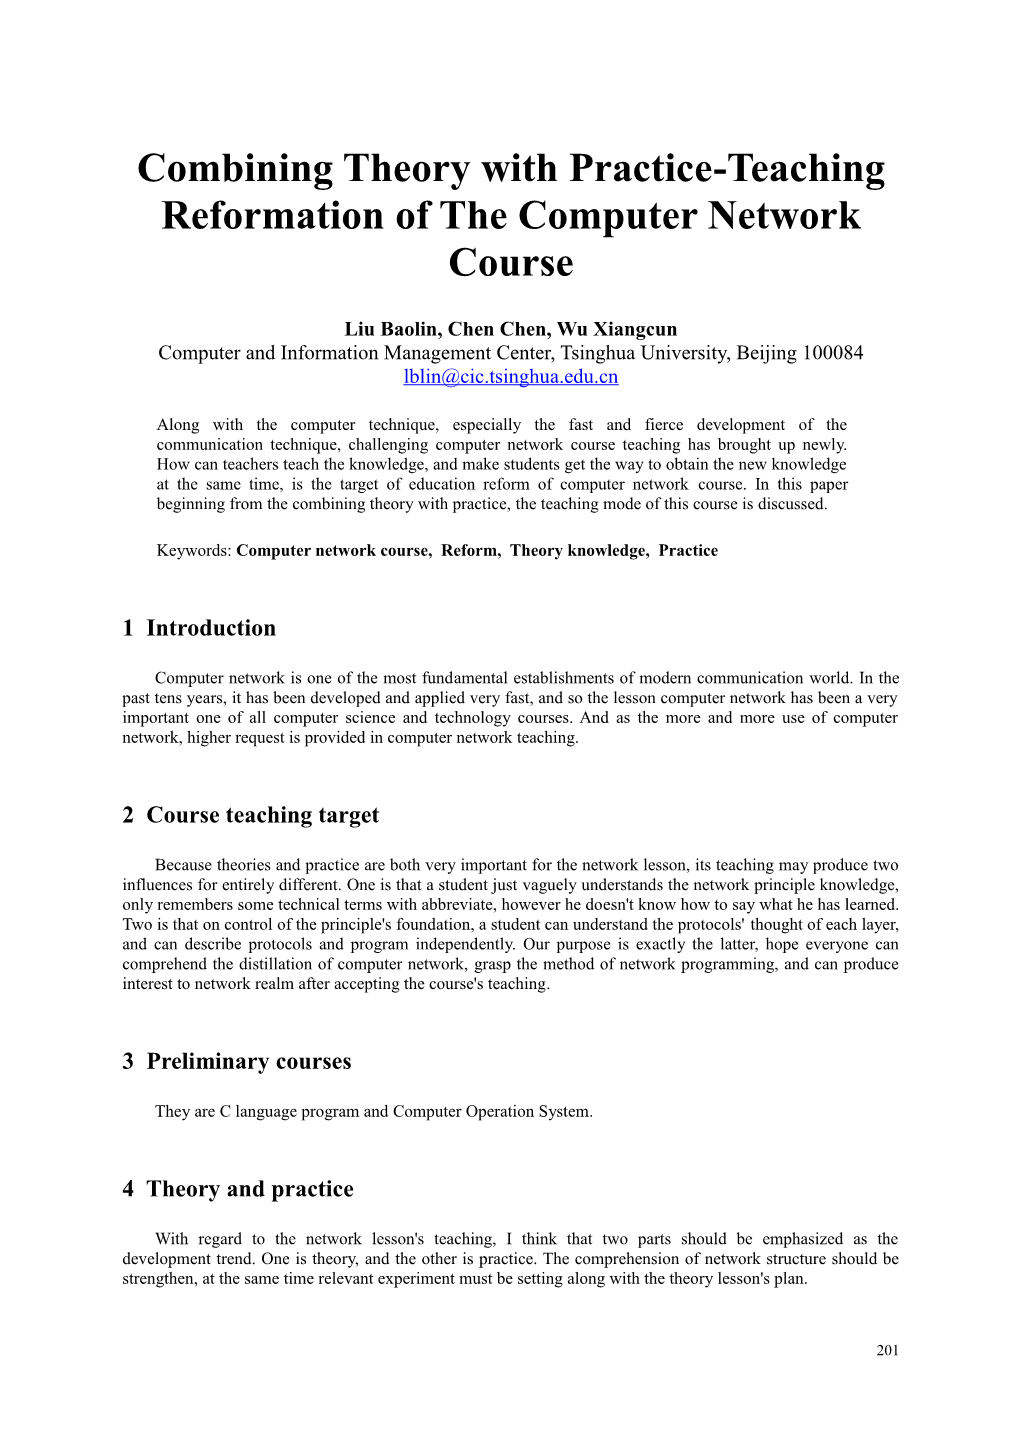 Combining Theory with Practice-Teaching Reformationof the Computer Network Course